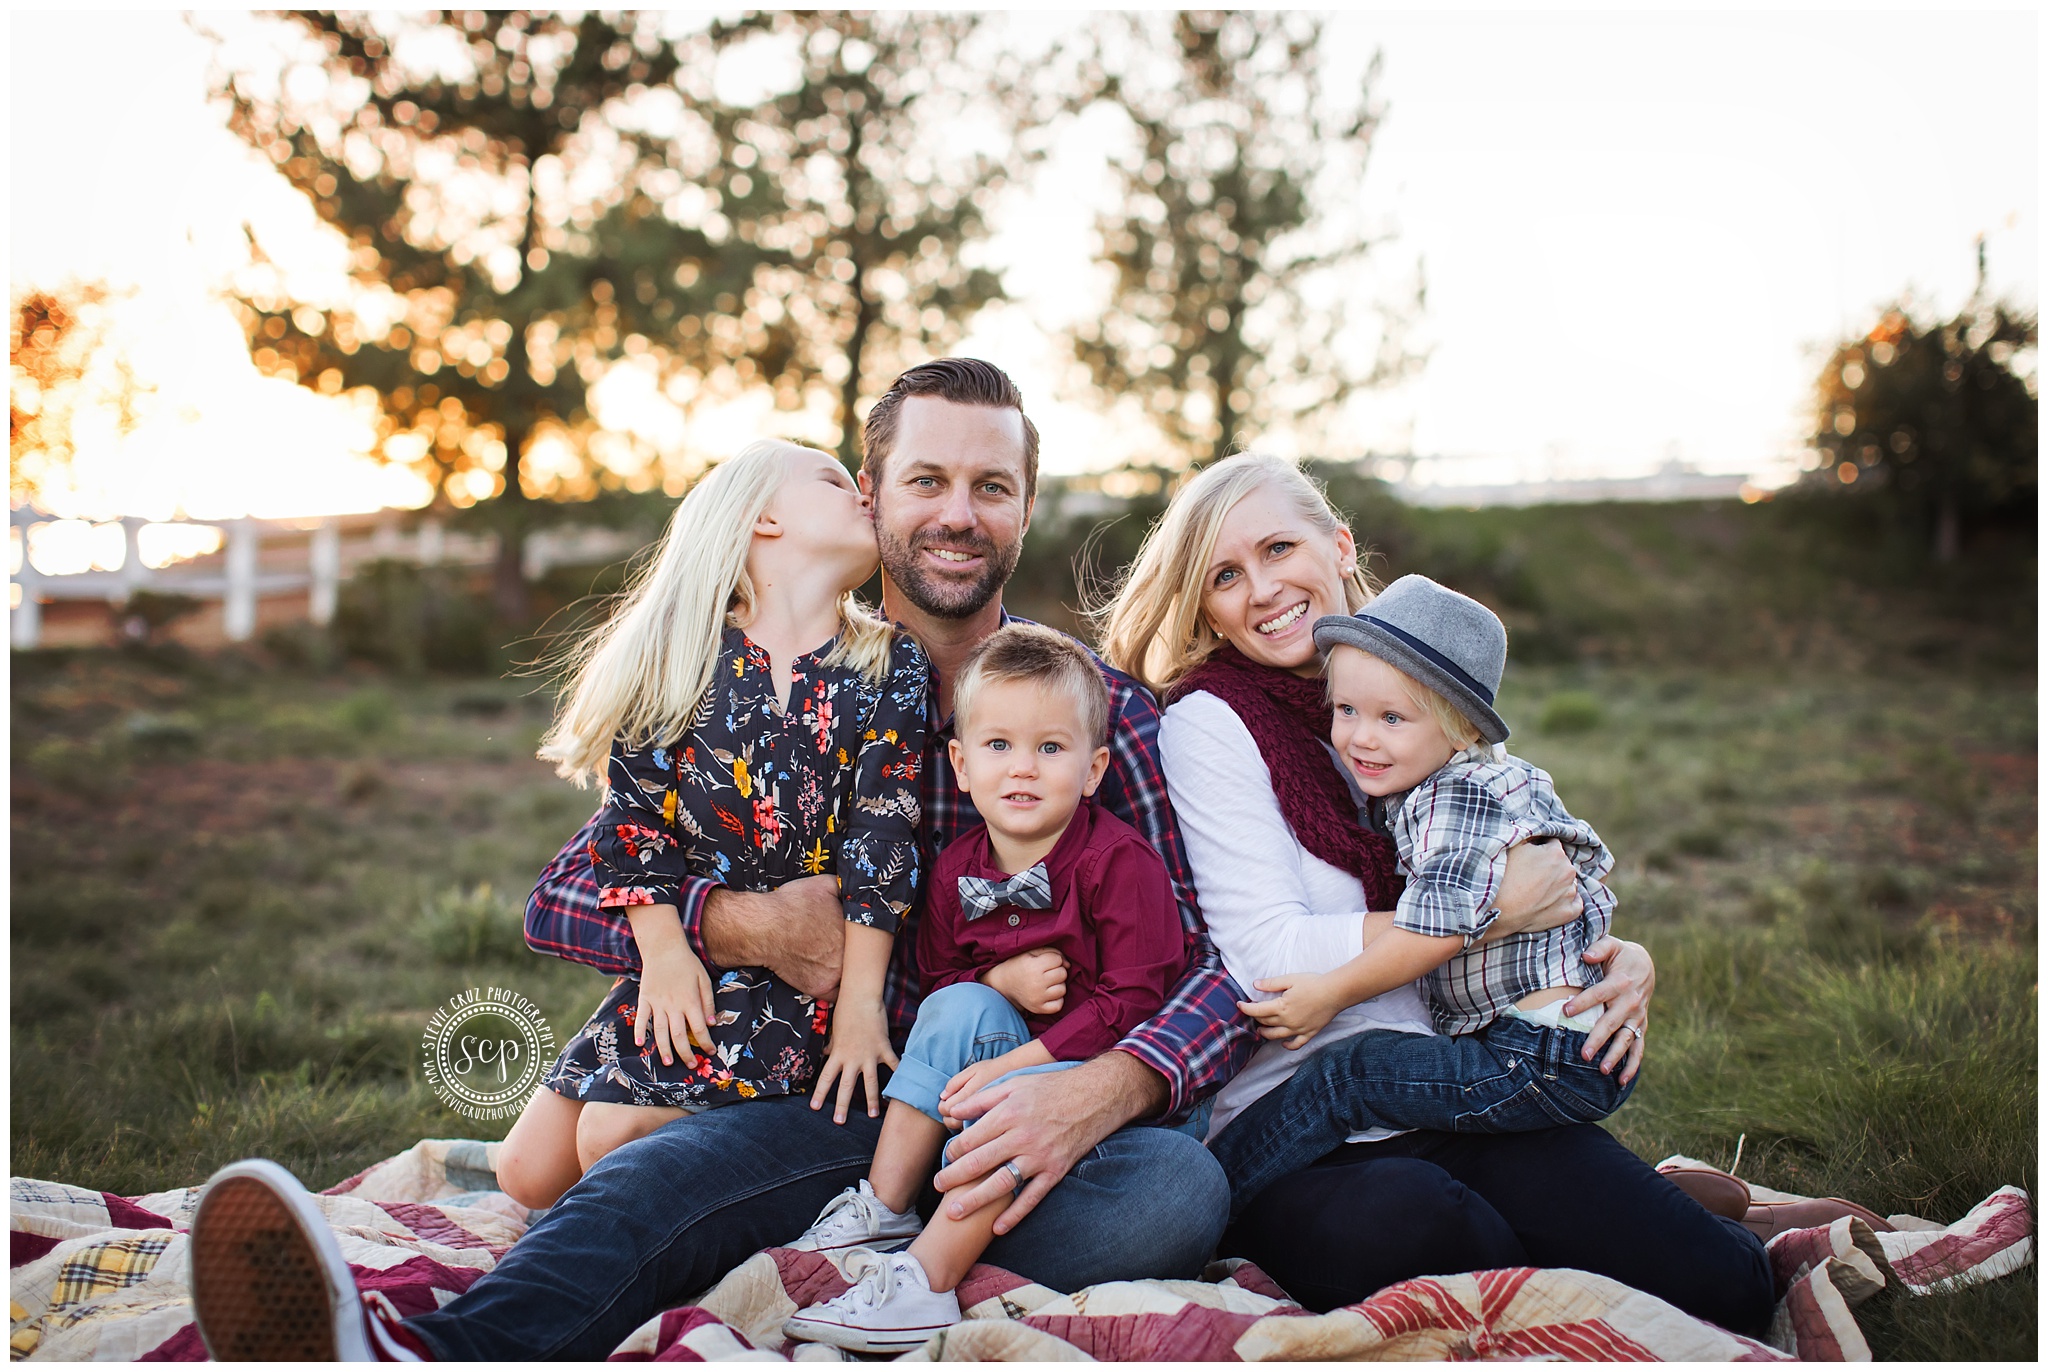 Lifestyle Family Photographer in anaheim hills